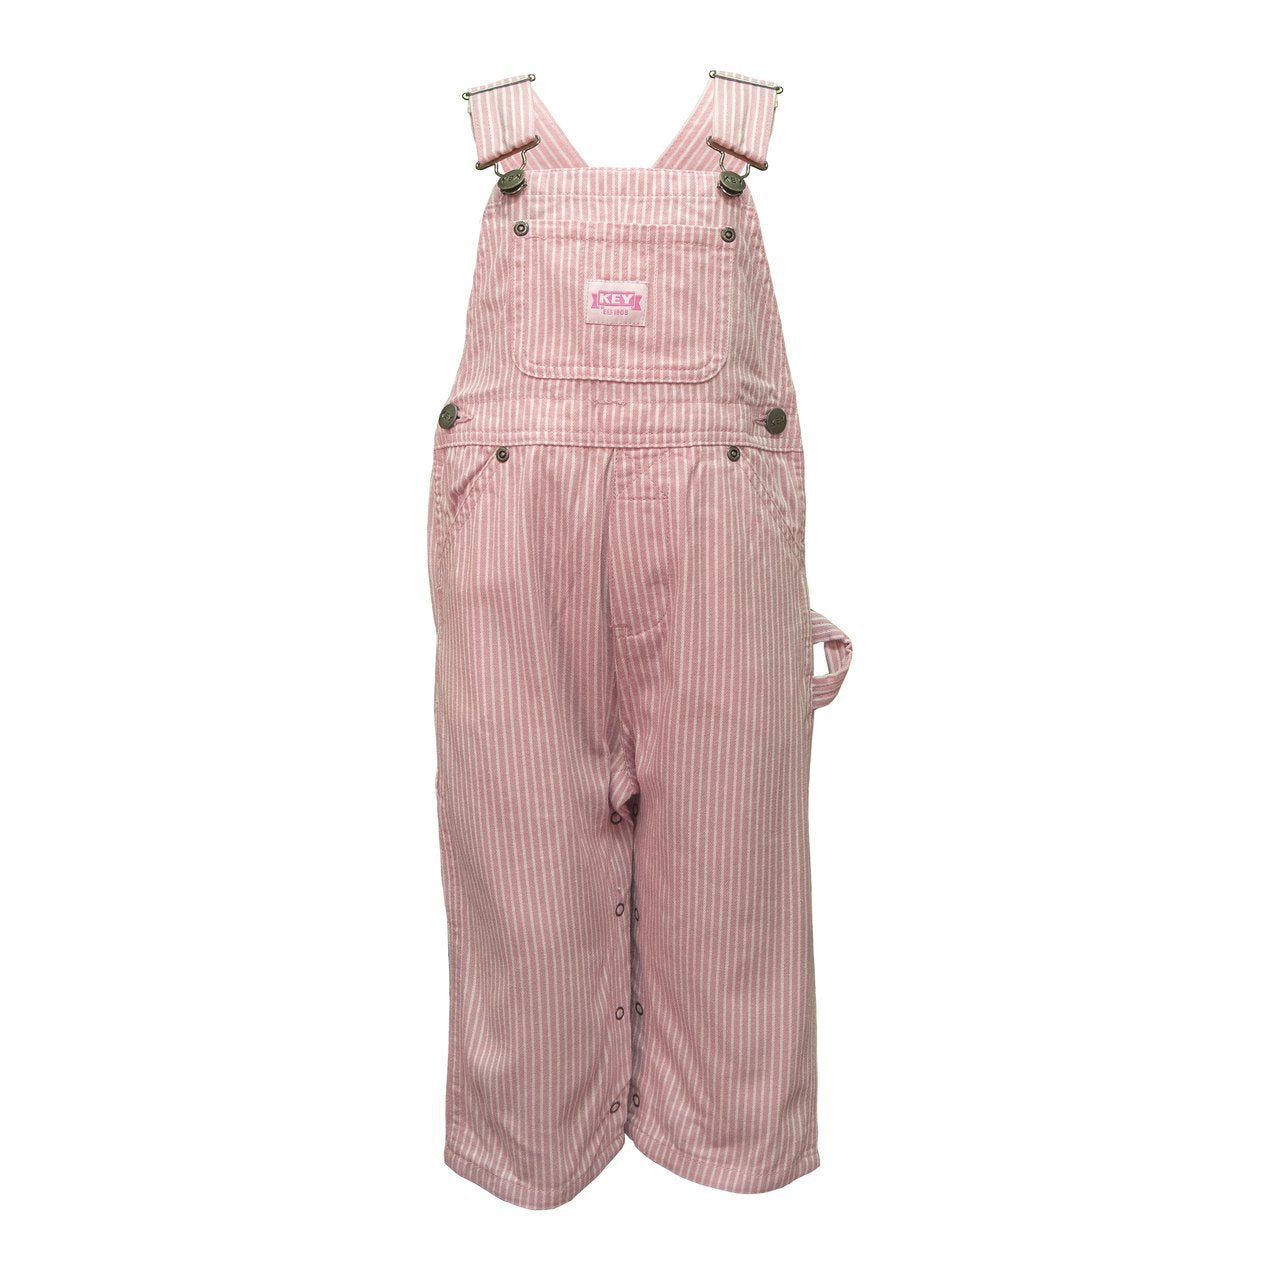 Front of infant, toddler and young girl's pink stripe dungarees from key industries USA showing multiple pockets, leg poppers, mock zip fly and side button fastening.